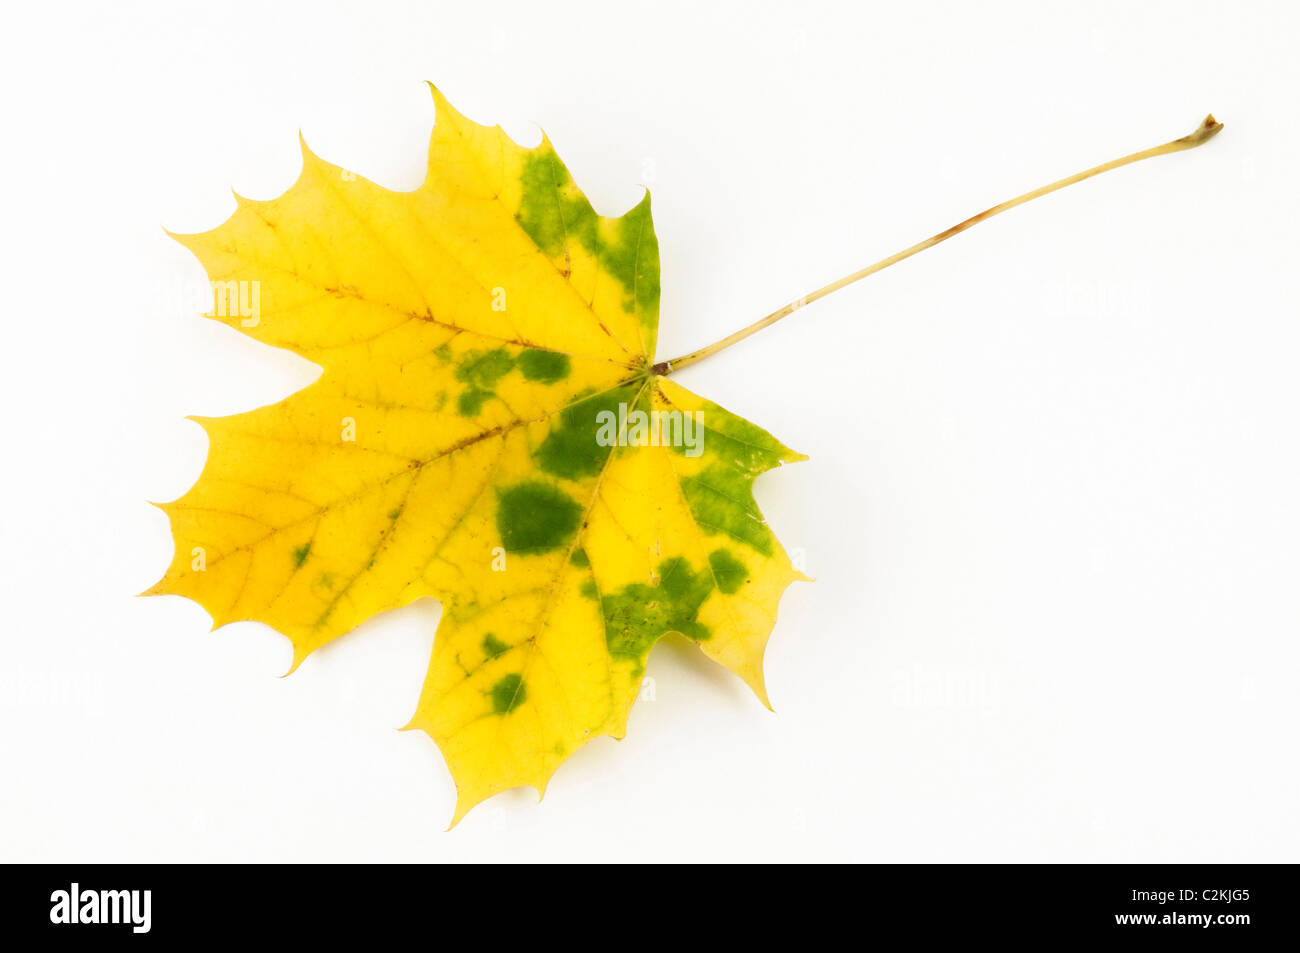 Norway Maple (Acer platanoides), autumn leaf. Studio picture against a white background. Stock Photo